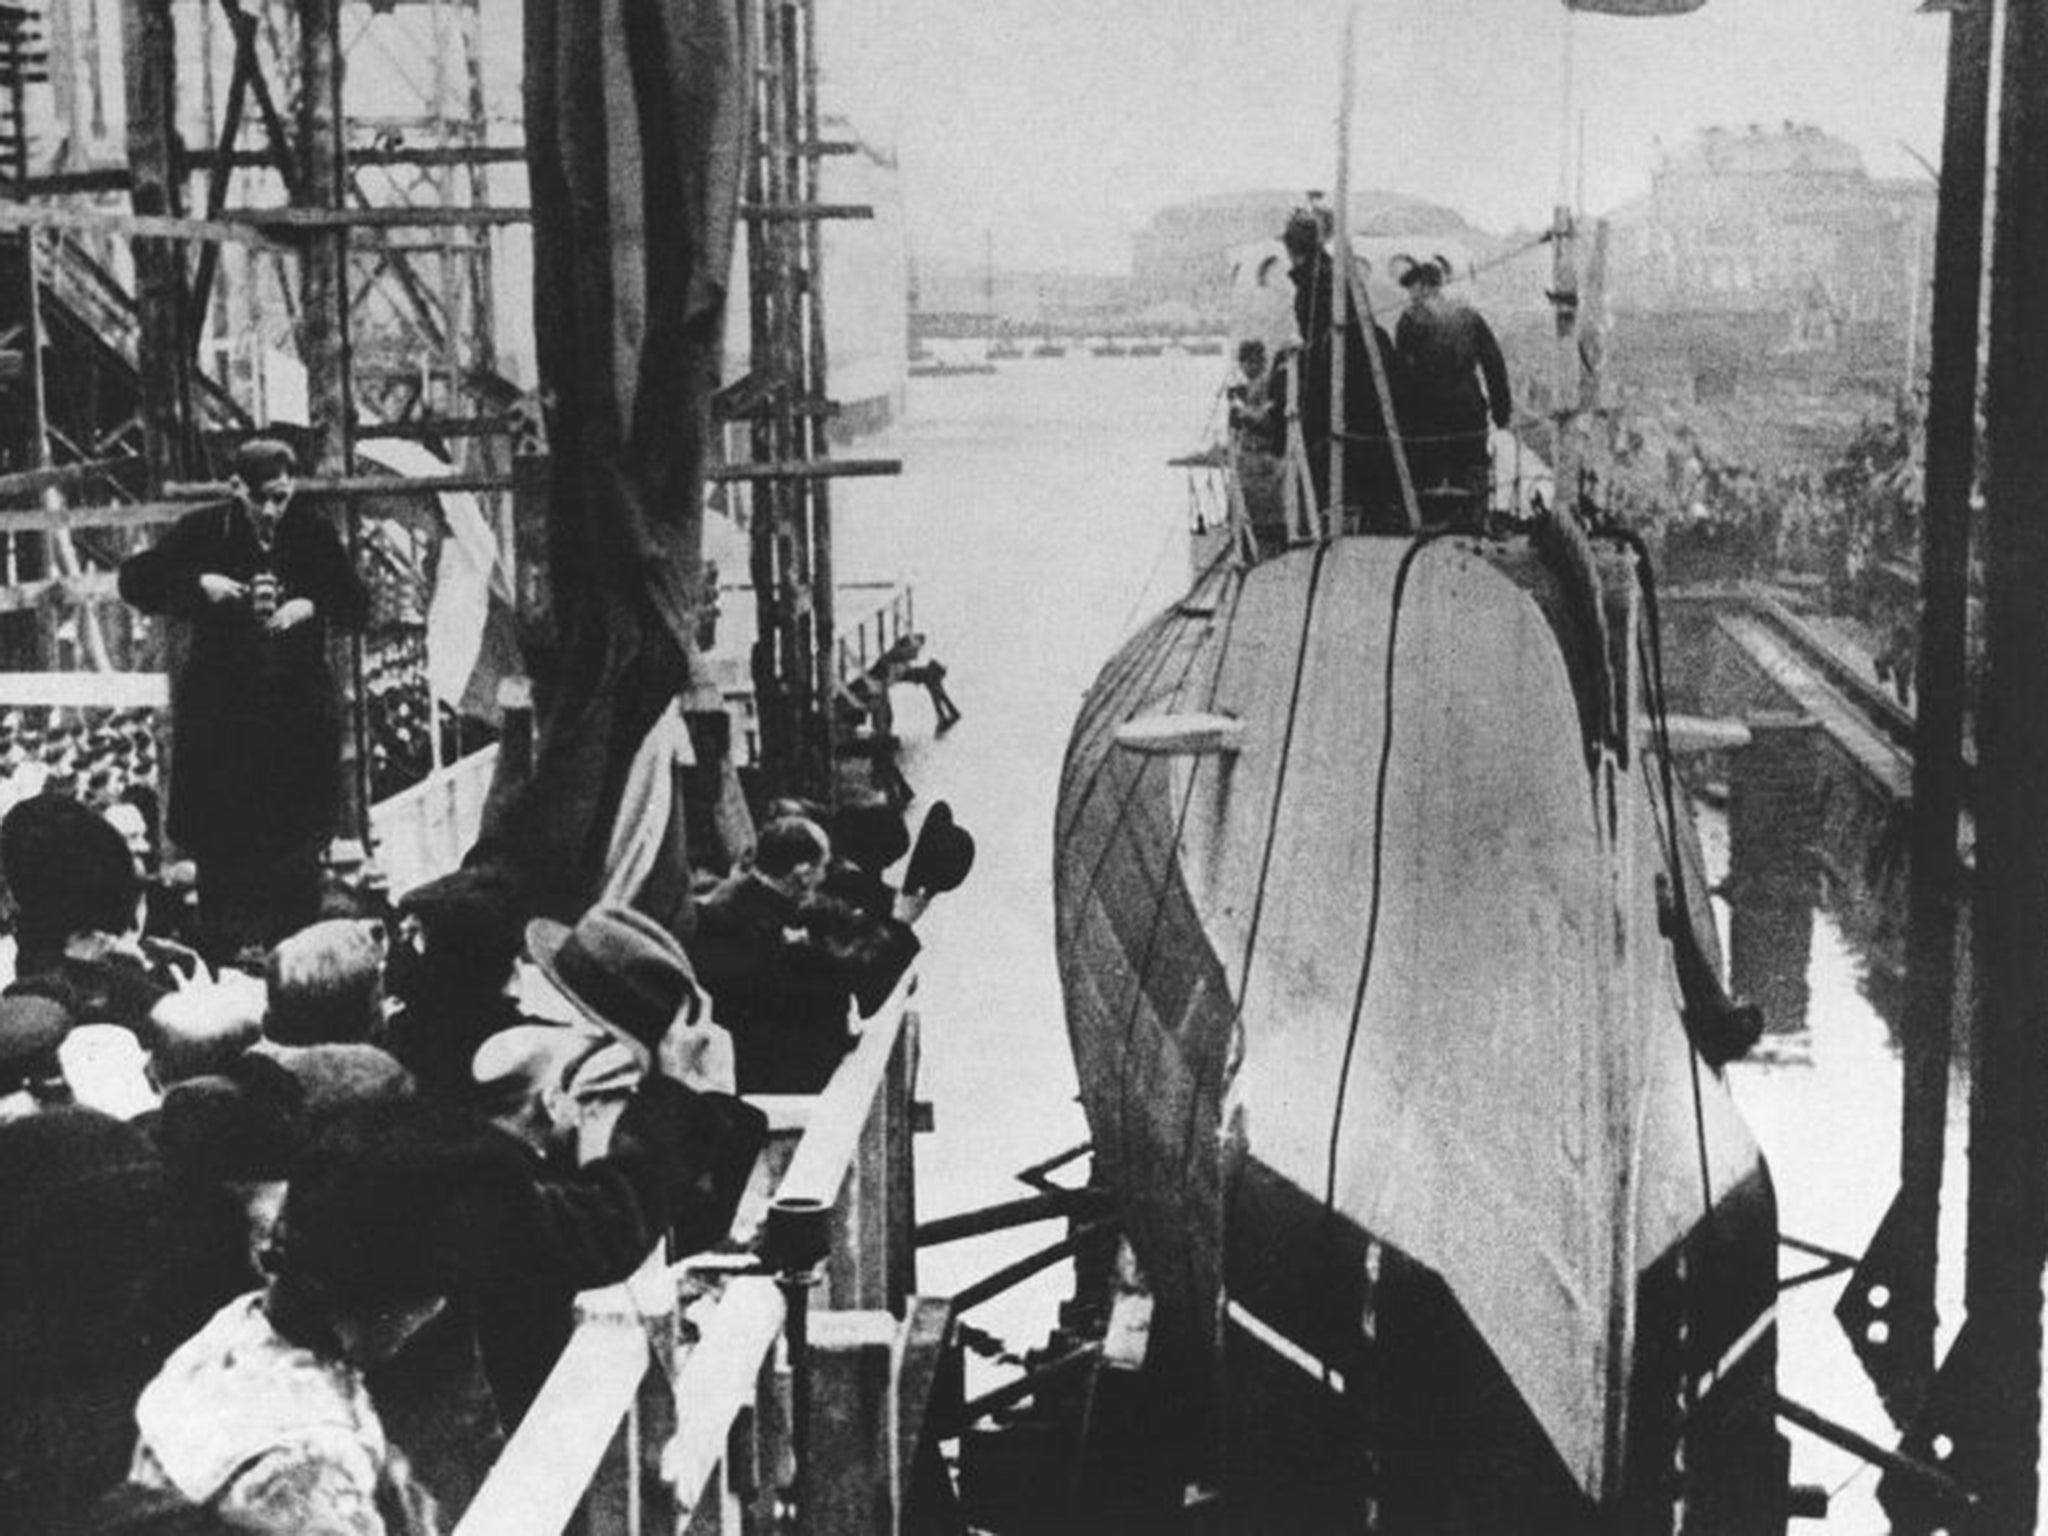 The submarine ‘Orzel’ was built at the De Schelde Dutch shipyard, and launched in 1938